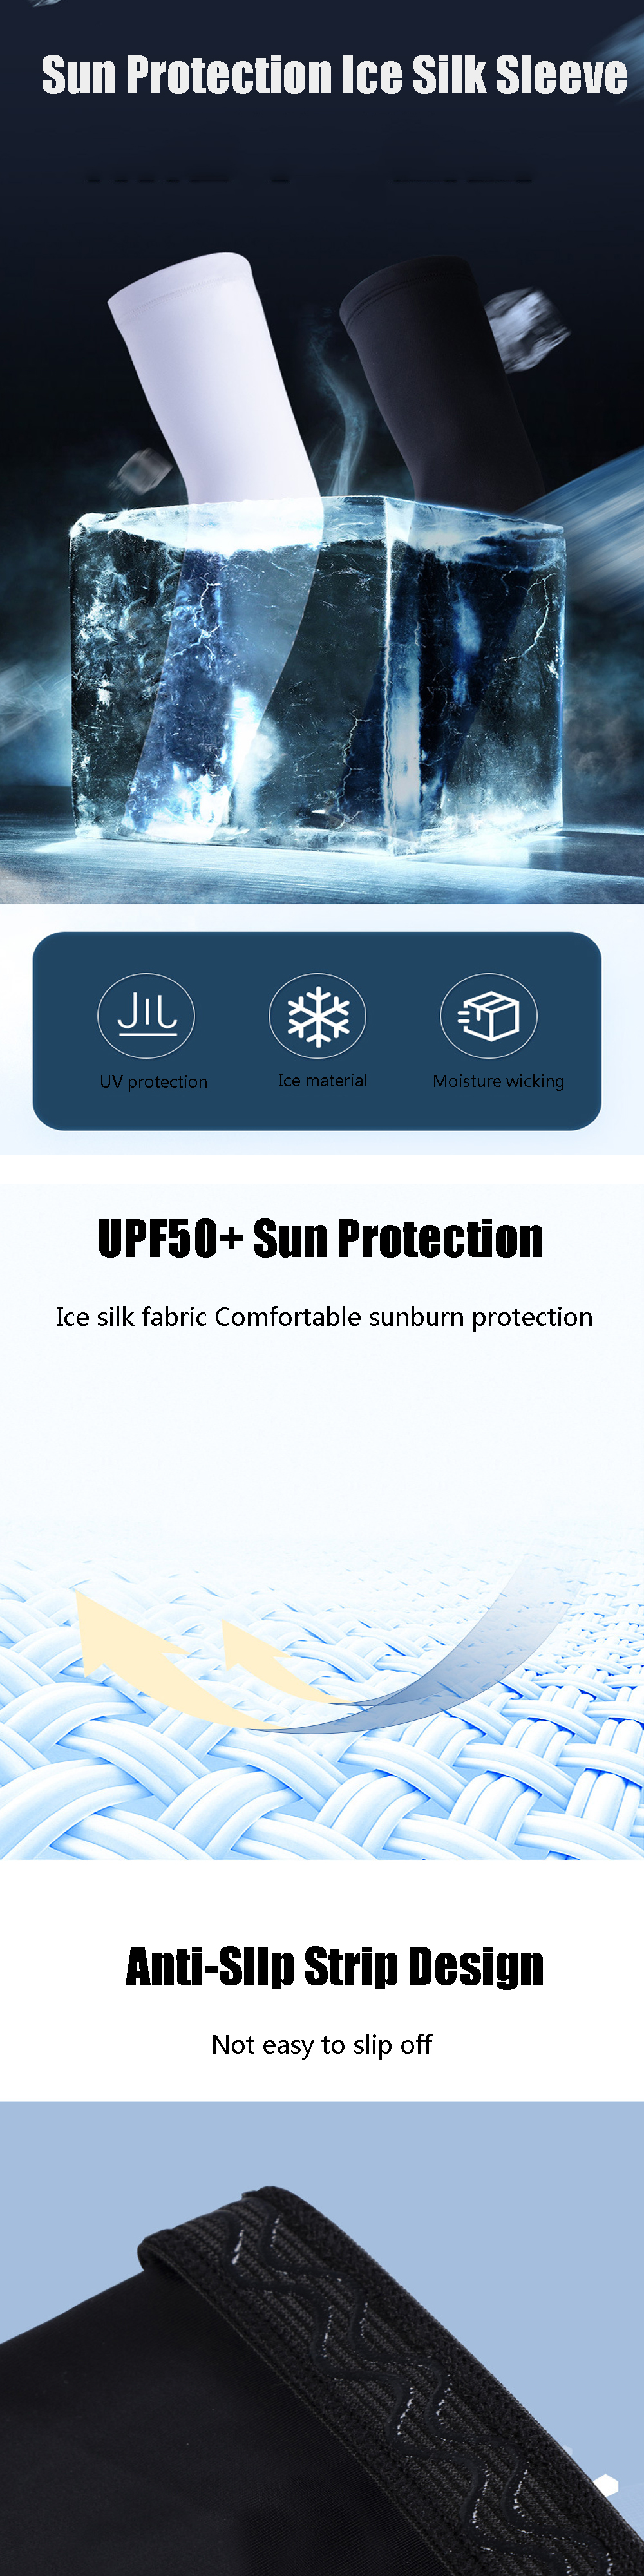 ZANLURE-UPF50-Summer-Ice-Sleeve-Breathable-Sun-Protection-UV-protection-Cool-Refreshing-Lightweight--1842126-1